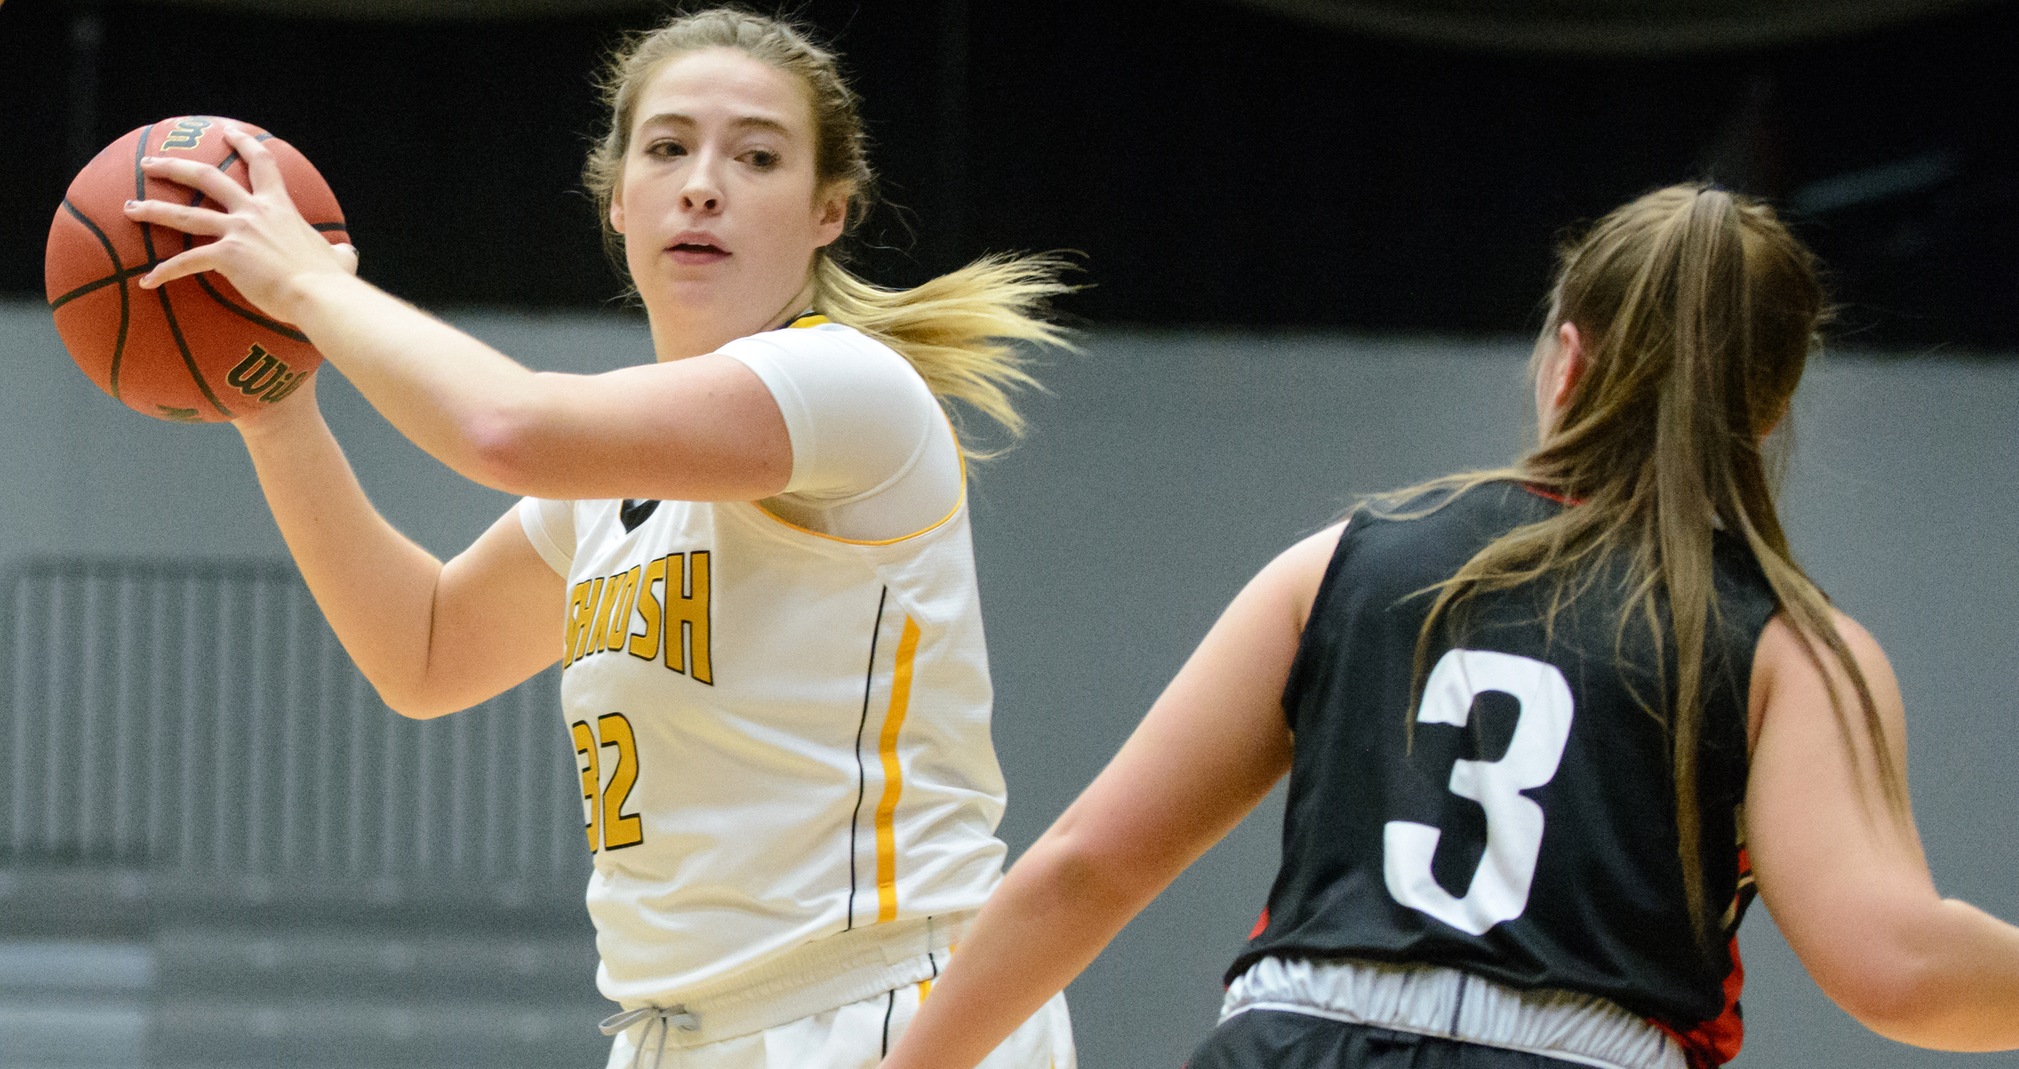 Madeline Staples scored 10 points with five rebounds and three assists against the Lions.